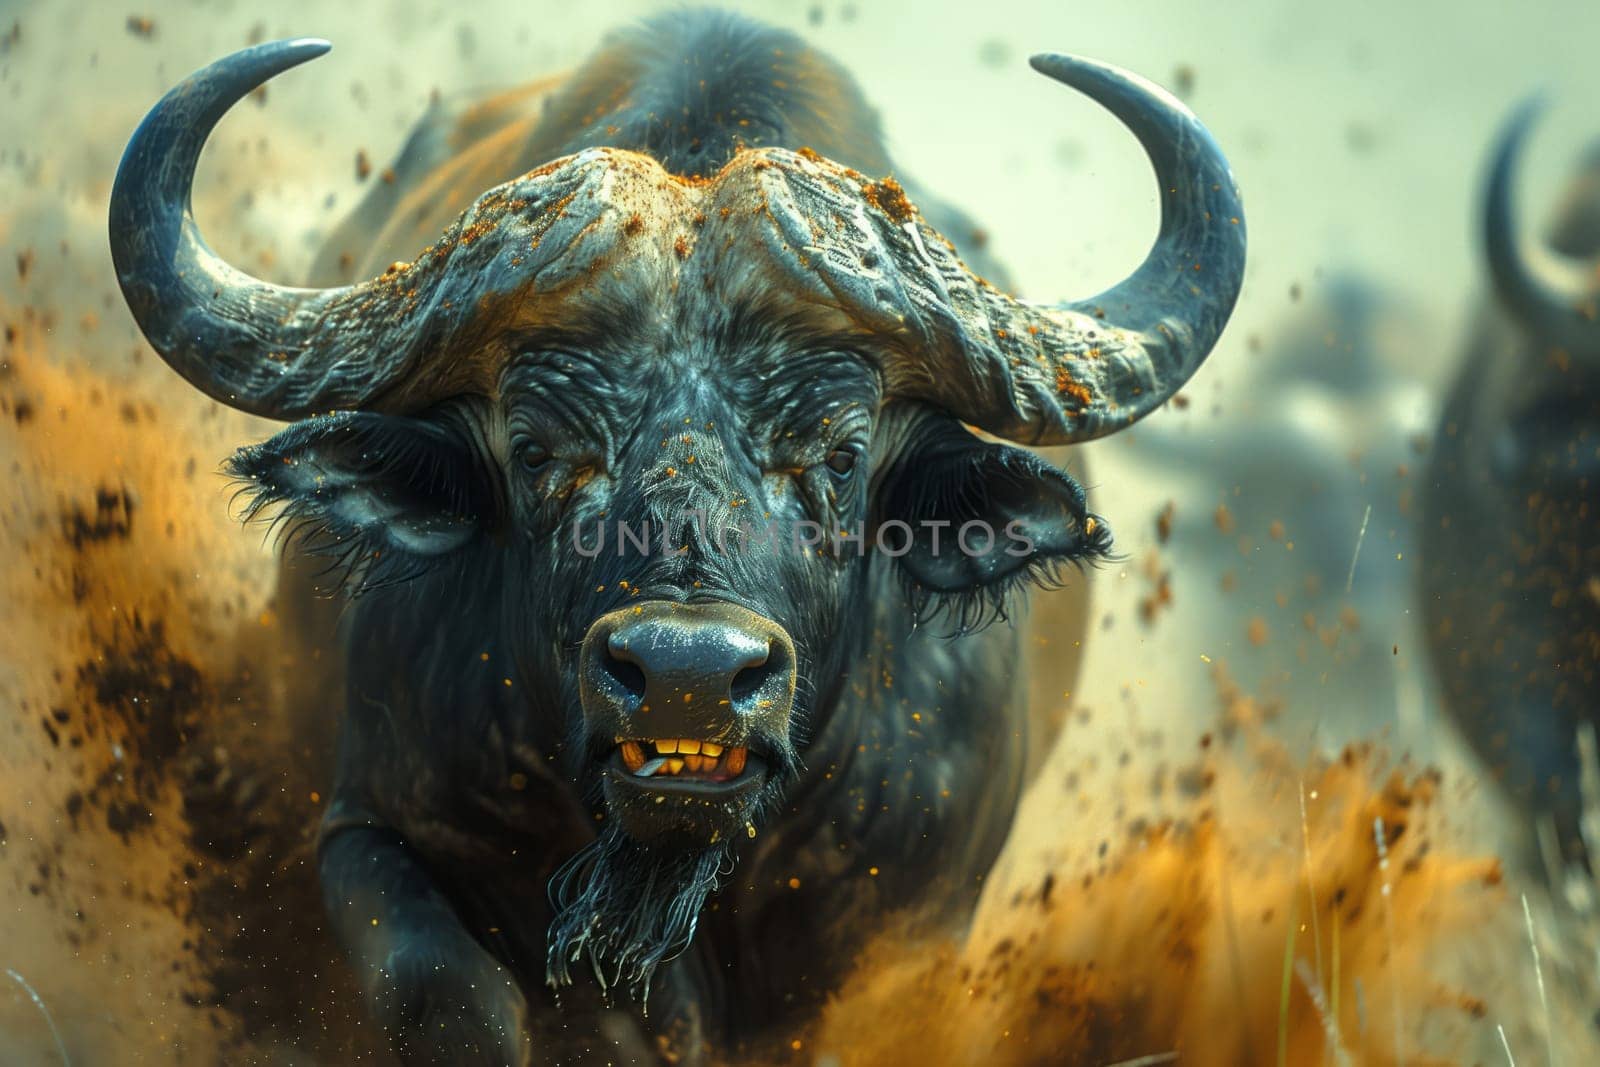 Closeup of a powerful bull charging through the muddy terrain, showcasing its horned head and snout as it moves with grace and strength